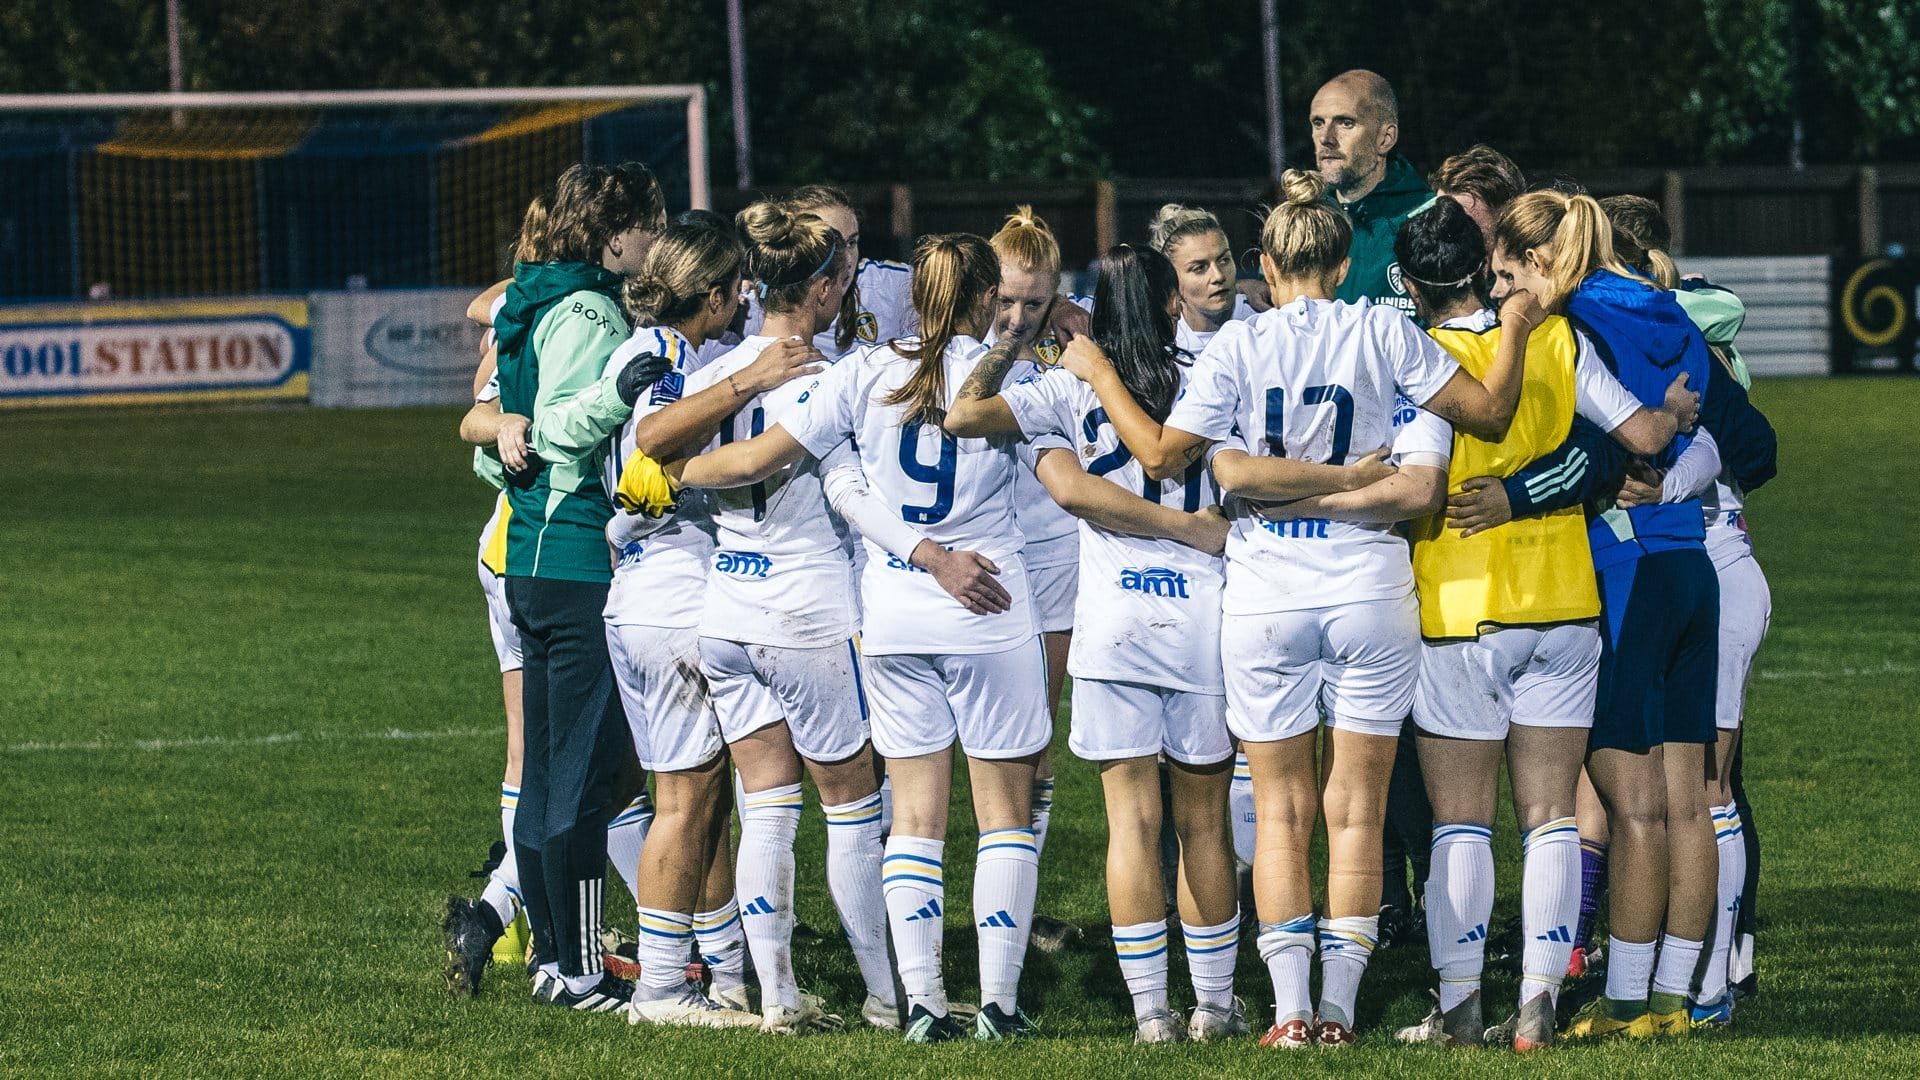 Leeds United Women players and staff form a huddle before their game against FCUM